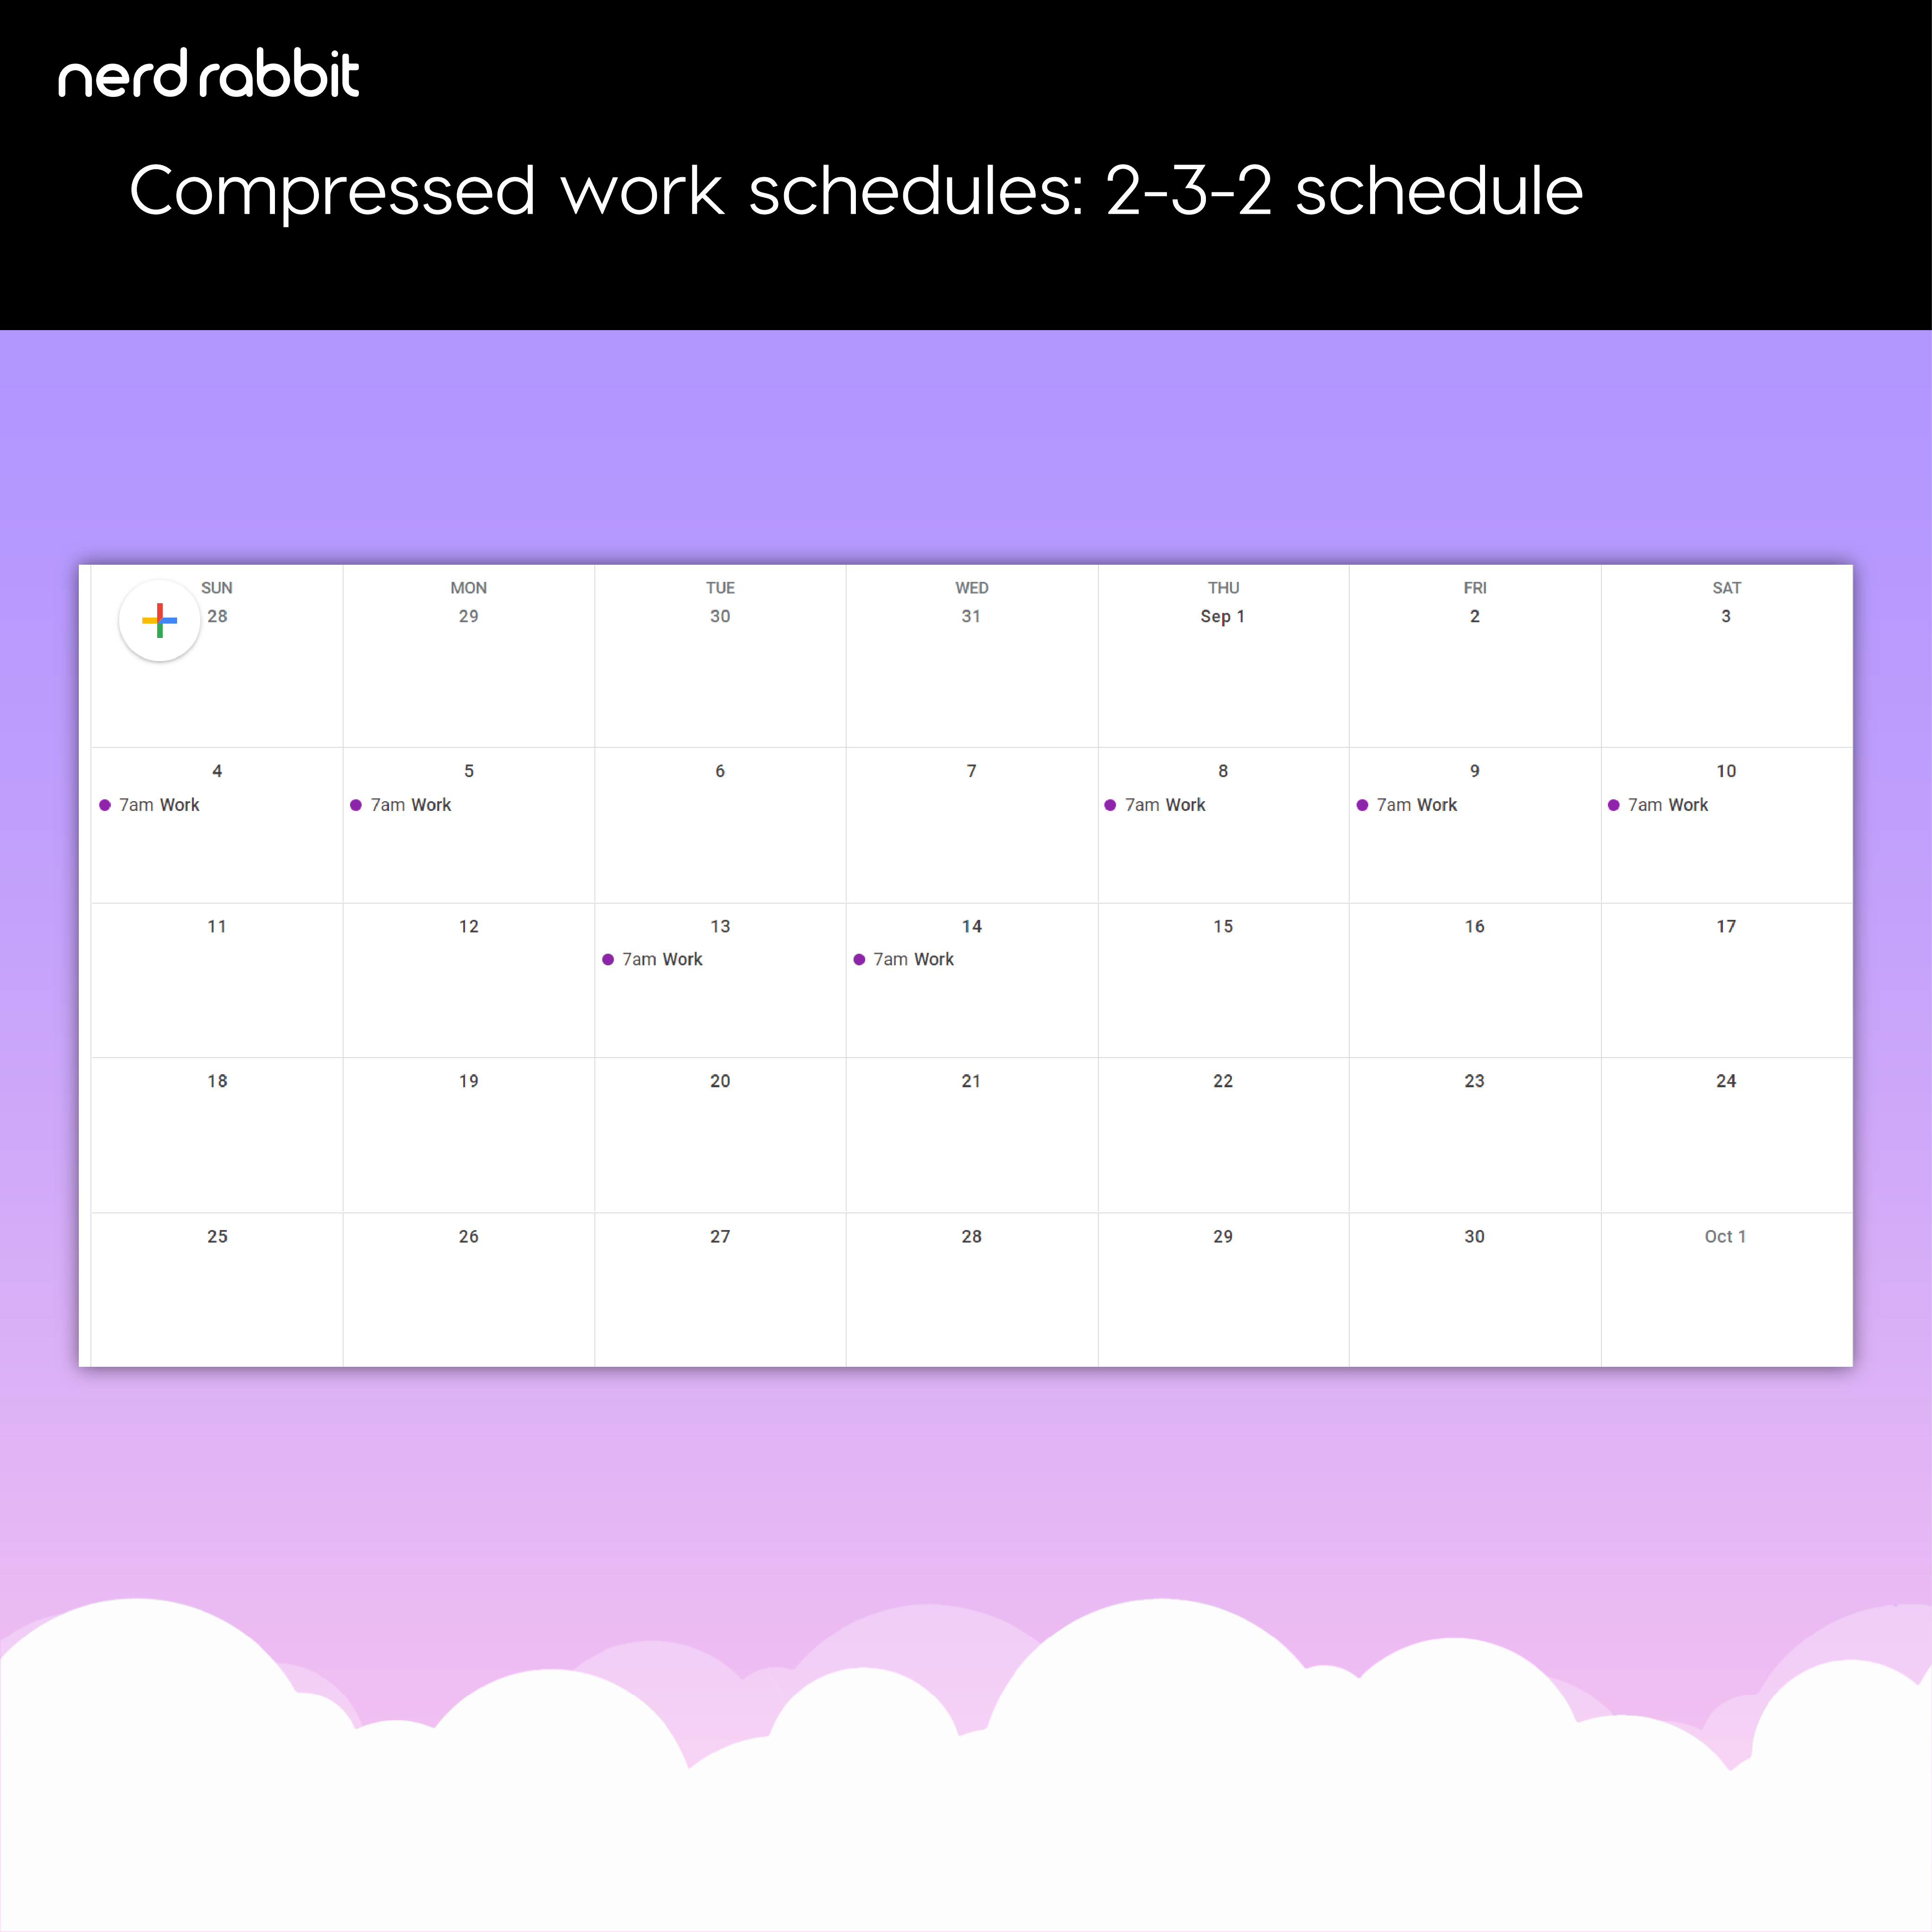 Picture of a 2-3-2 compressed work schedule.